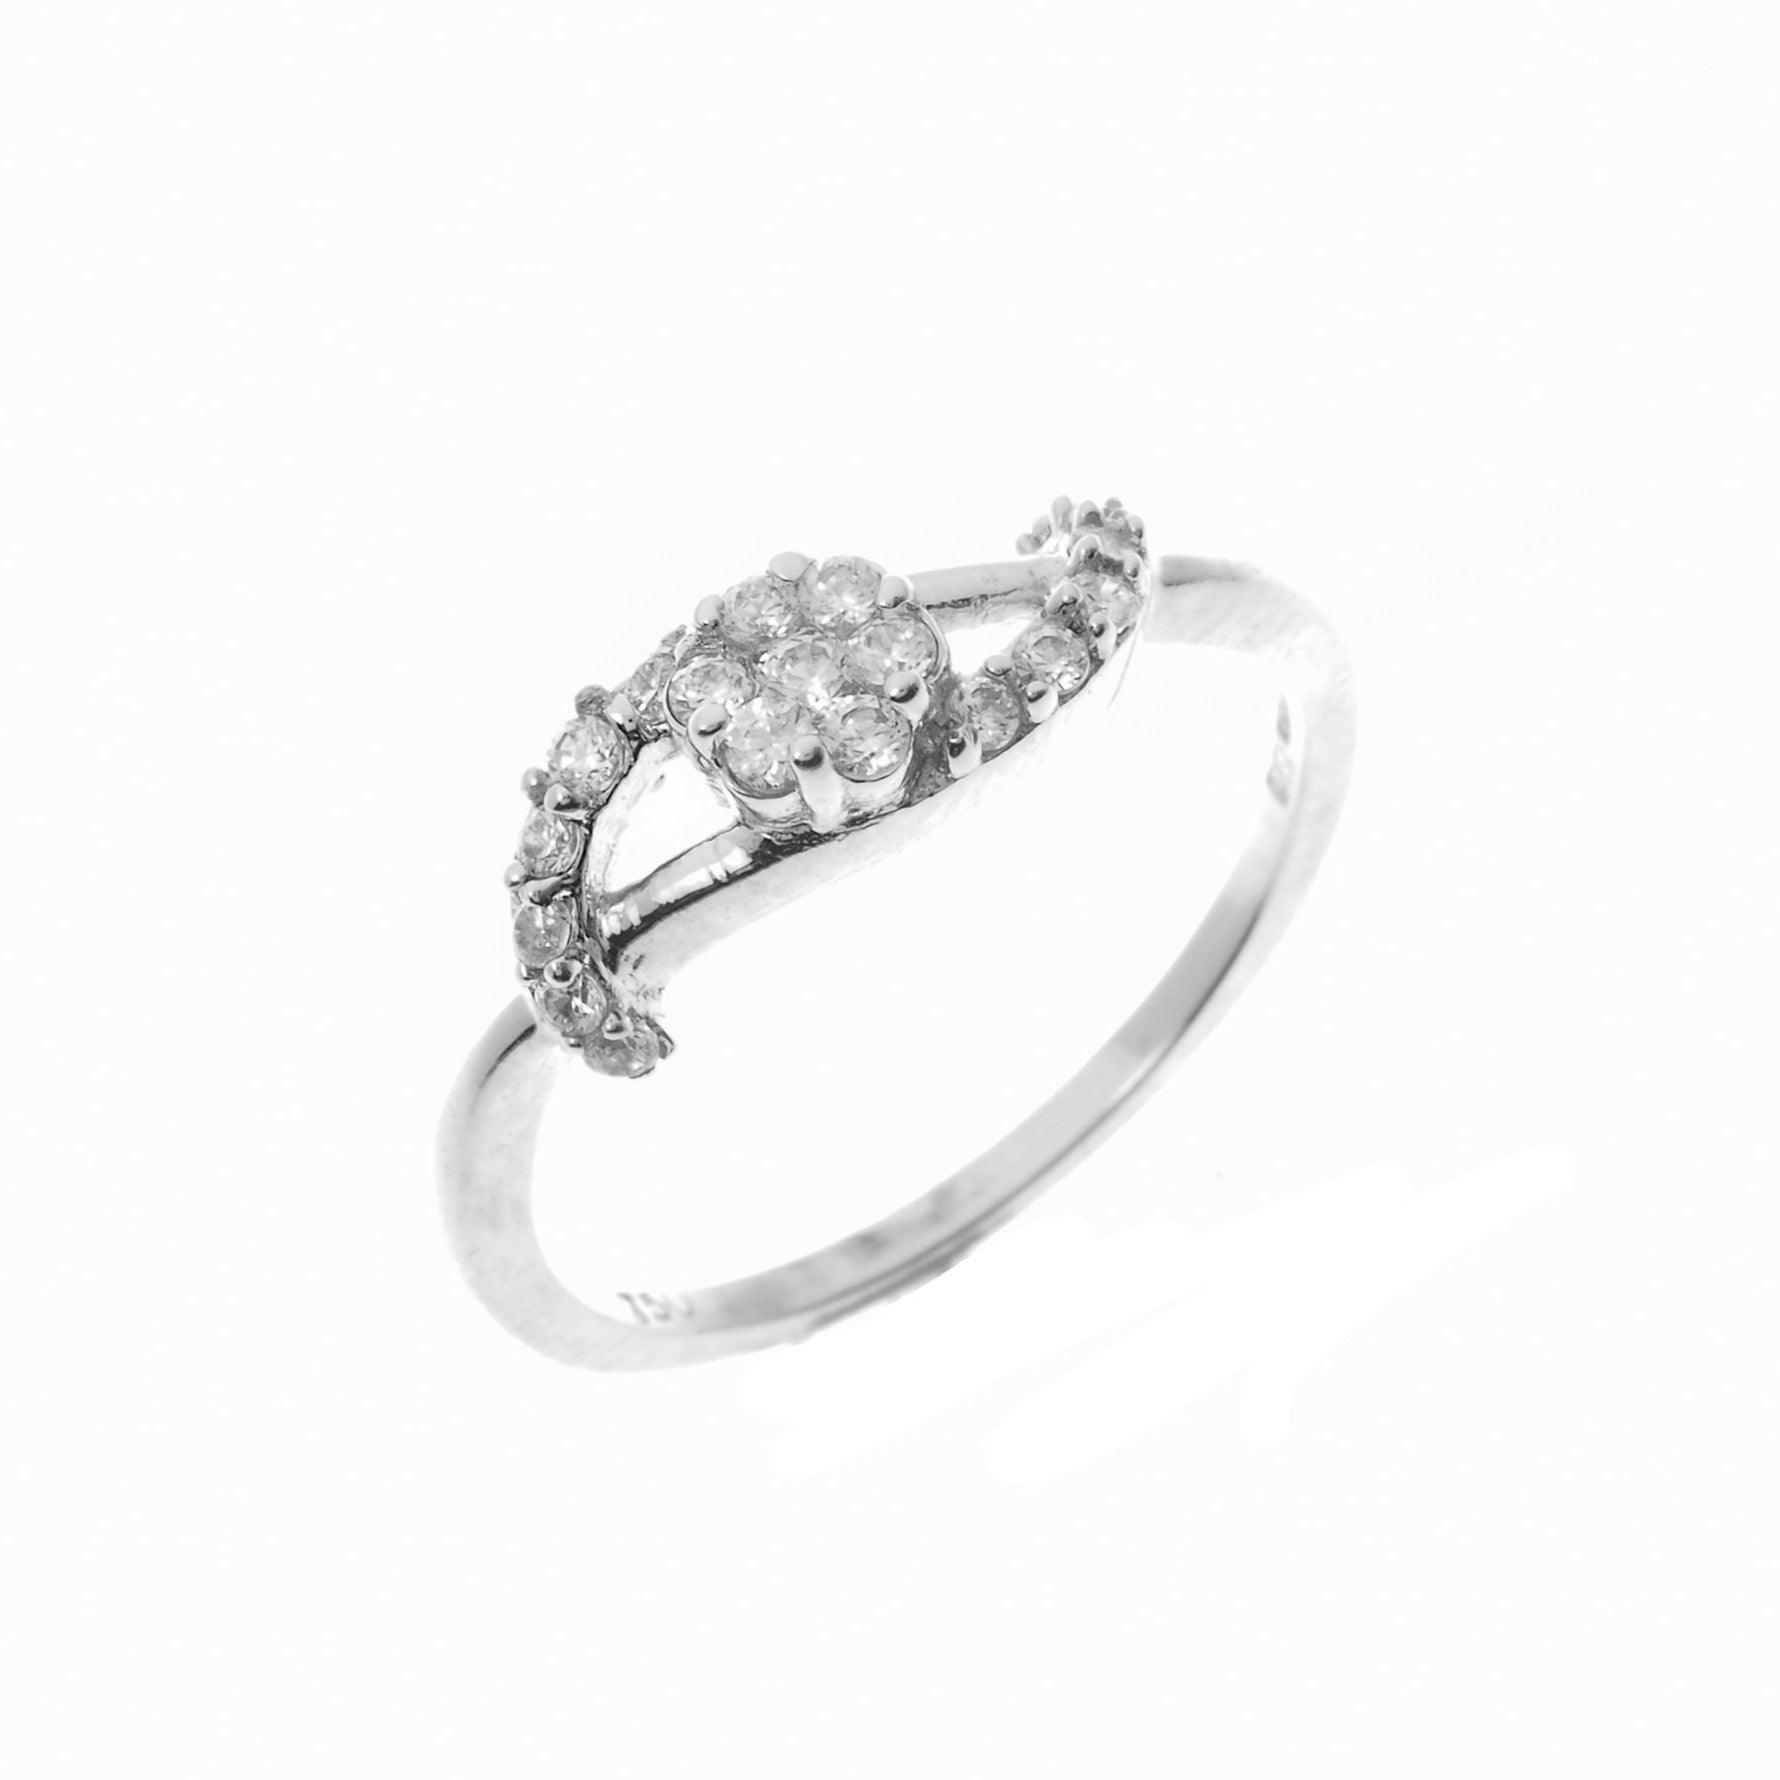 18ct White Gold Cubic Zirconia Engagement Ring LR1496 - Minar Jewellers